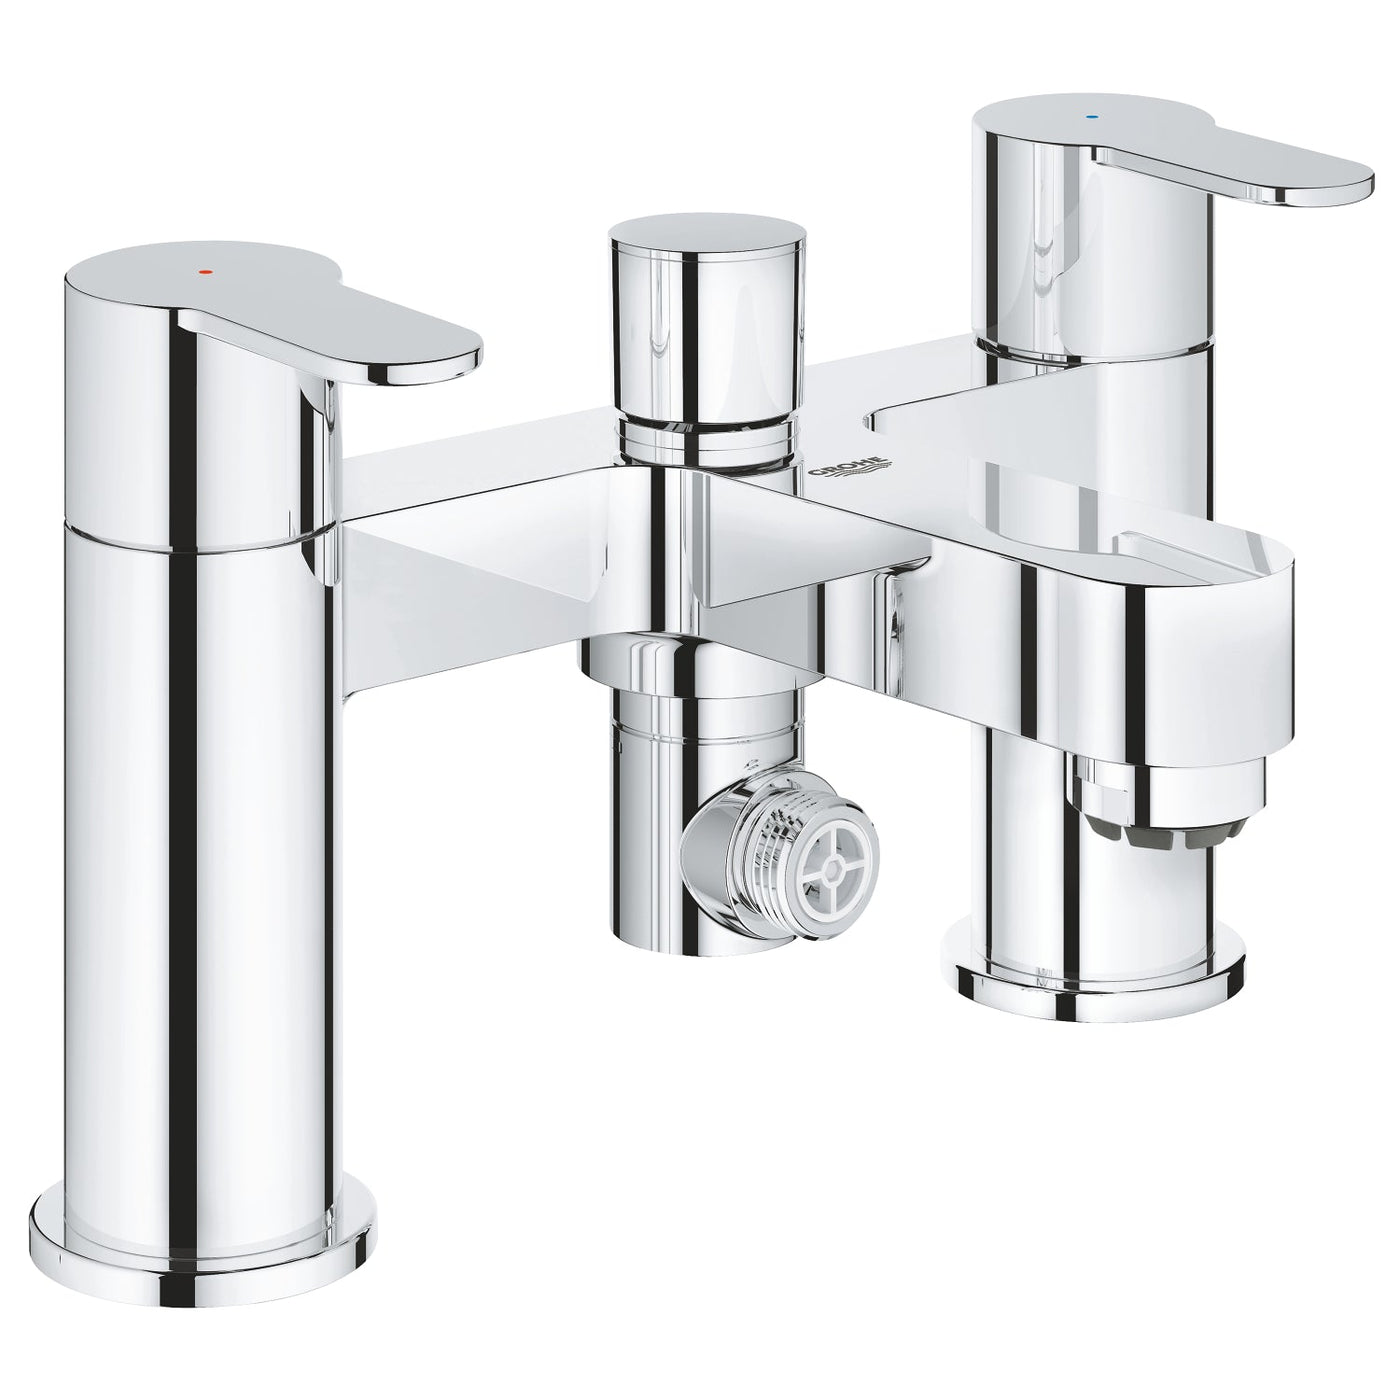 Grohe Deck Mounted Chrome BauEdge Two-handled Bath/Shower mixer ﾽ" - Letta London - 